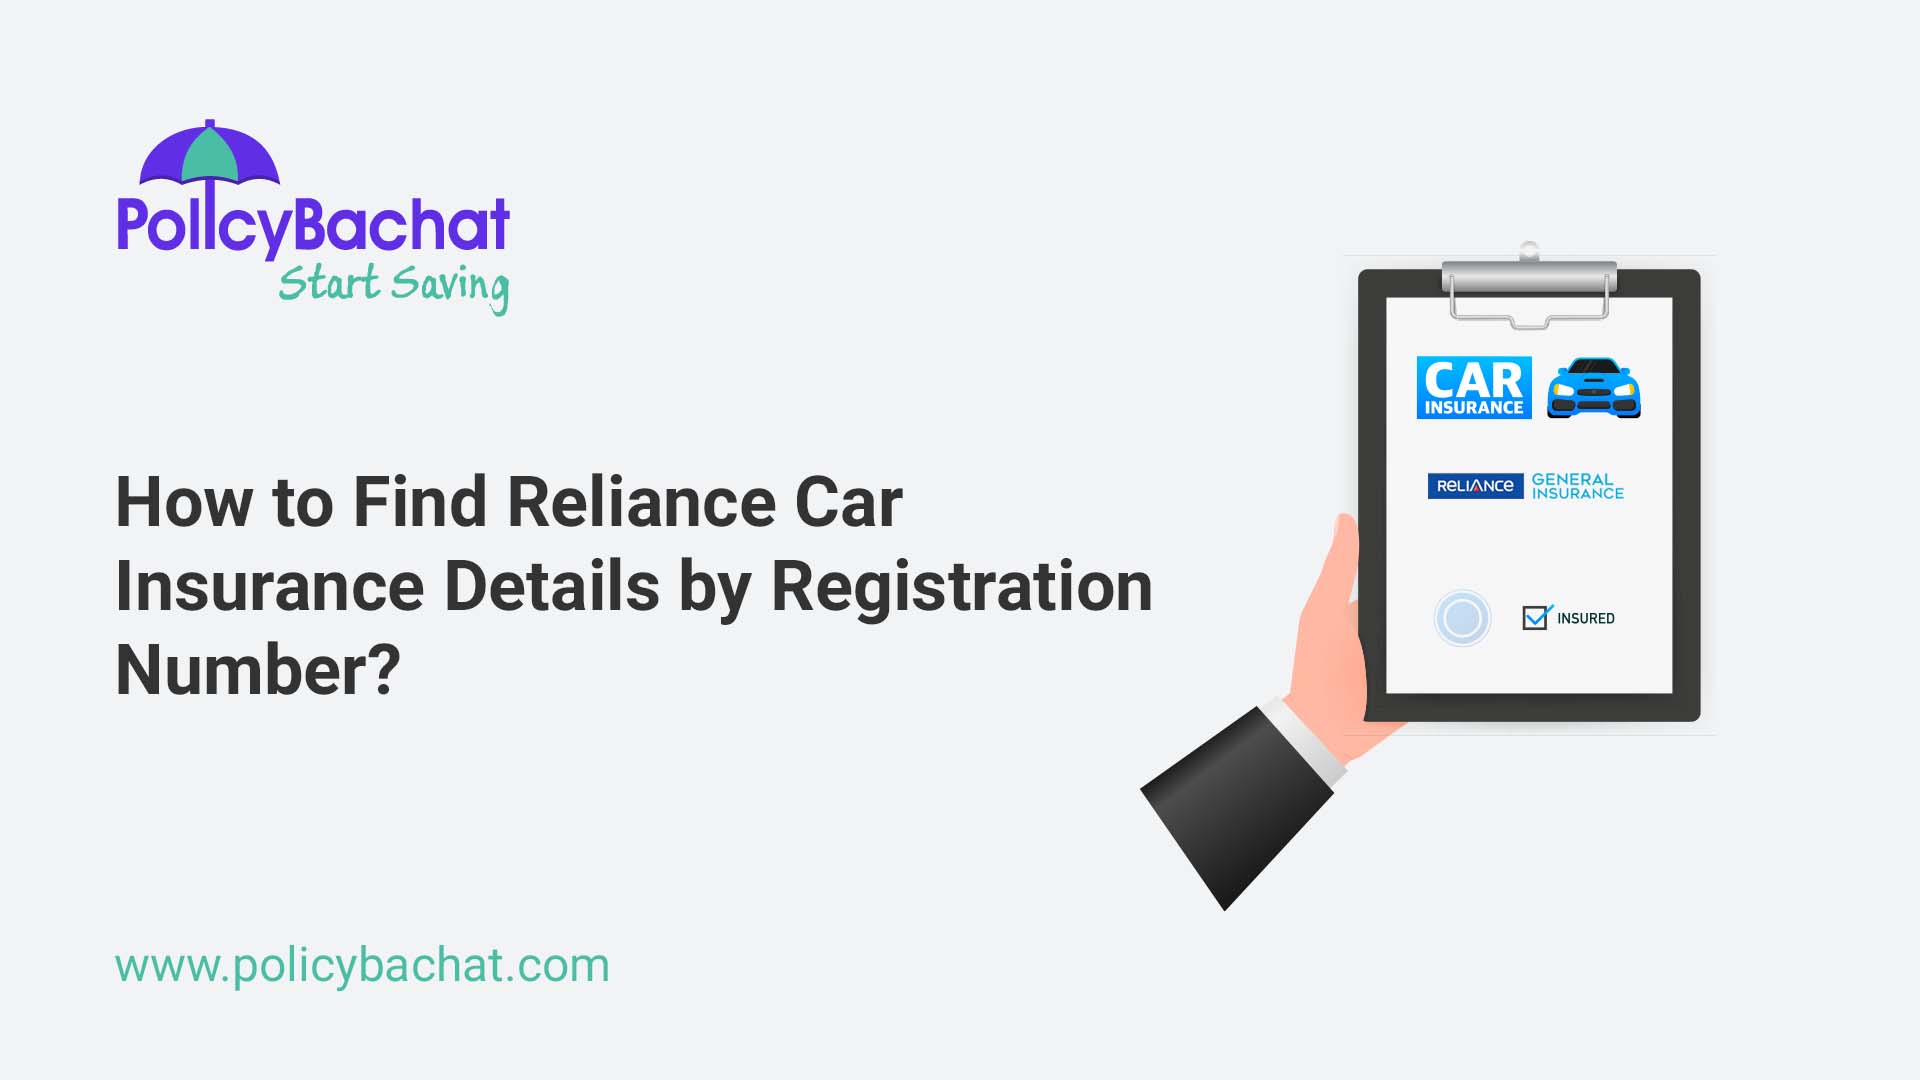 How to Find Reliance Car Insurance Details by Registration Number